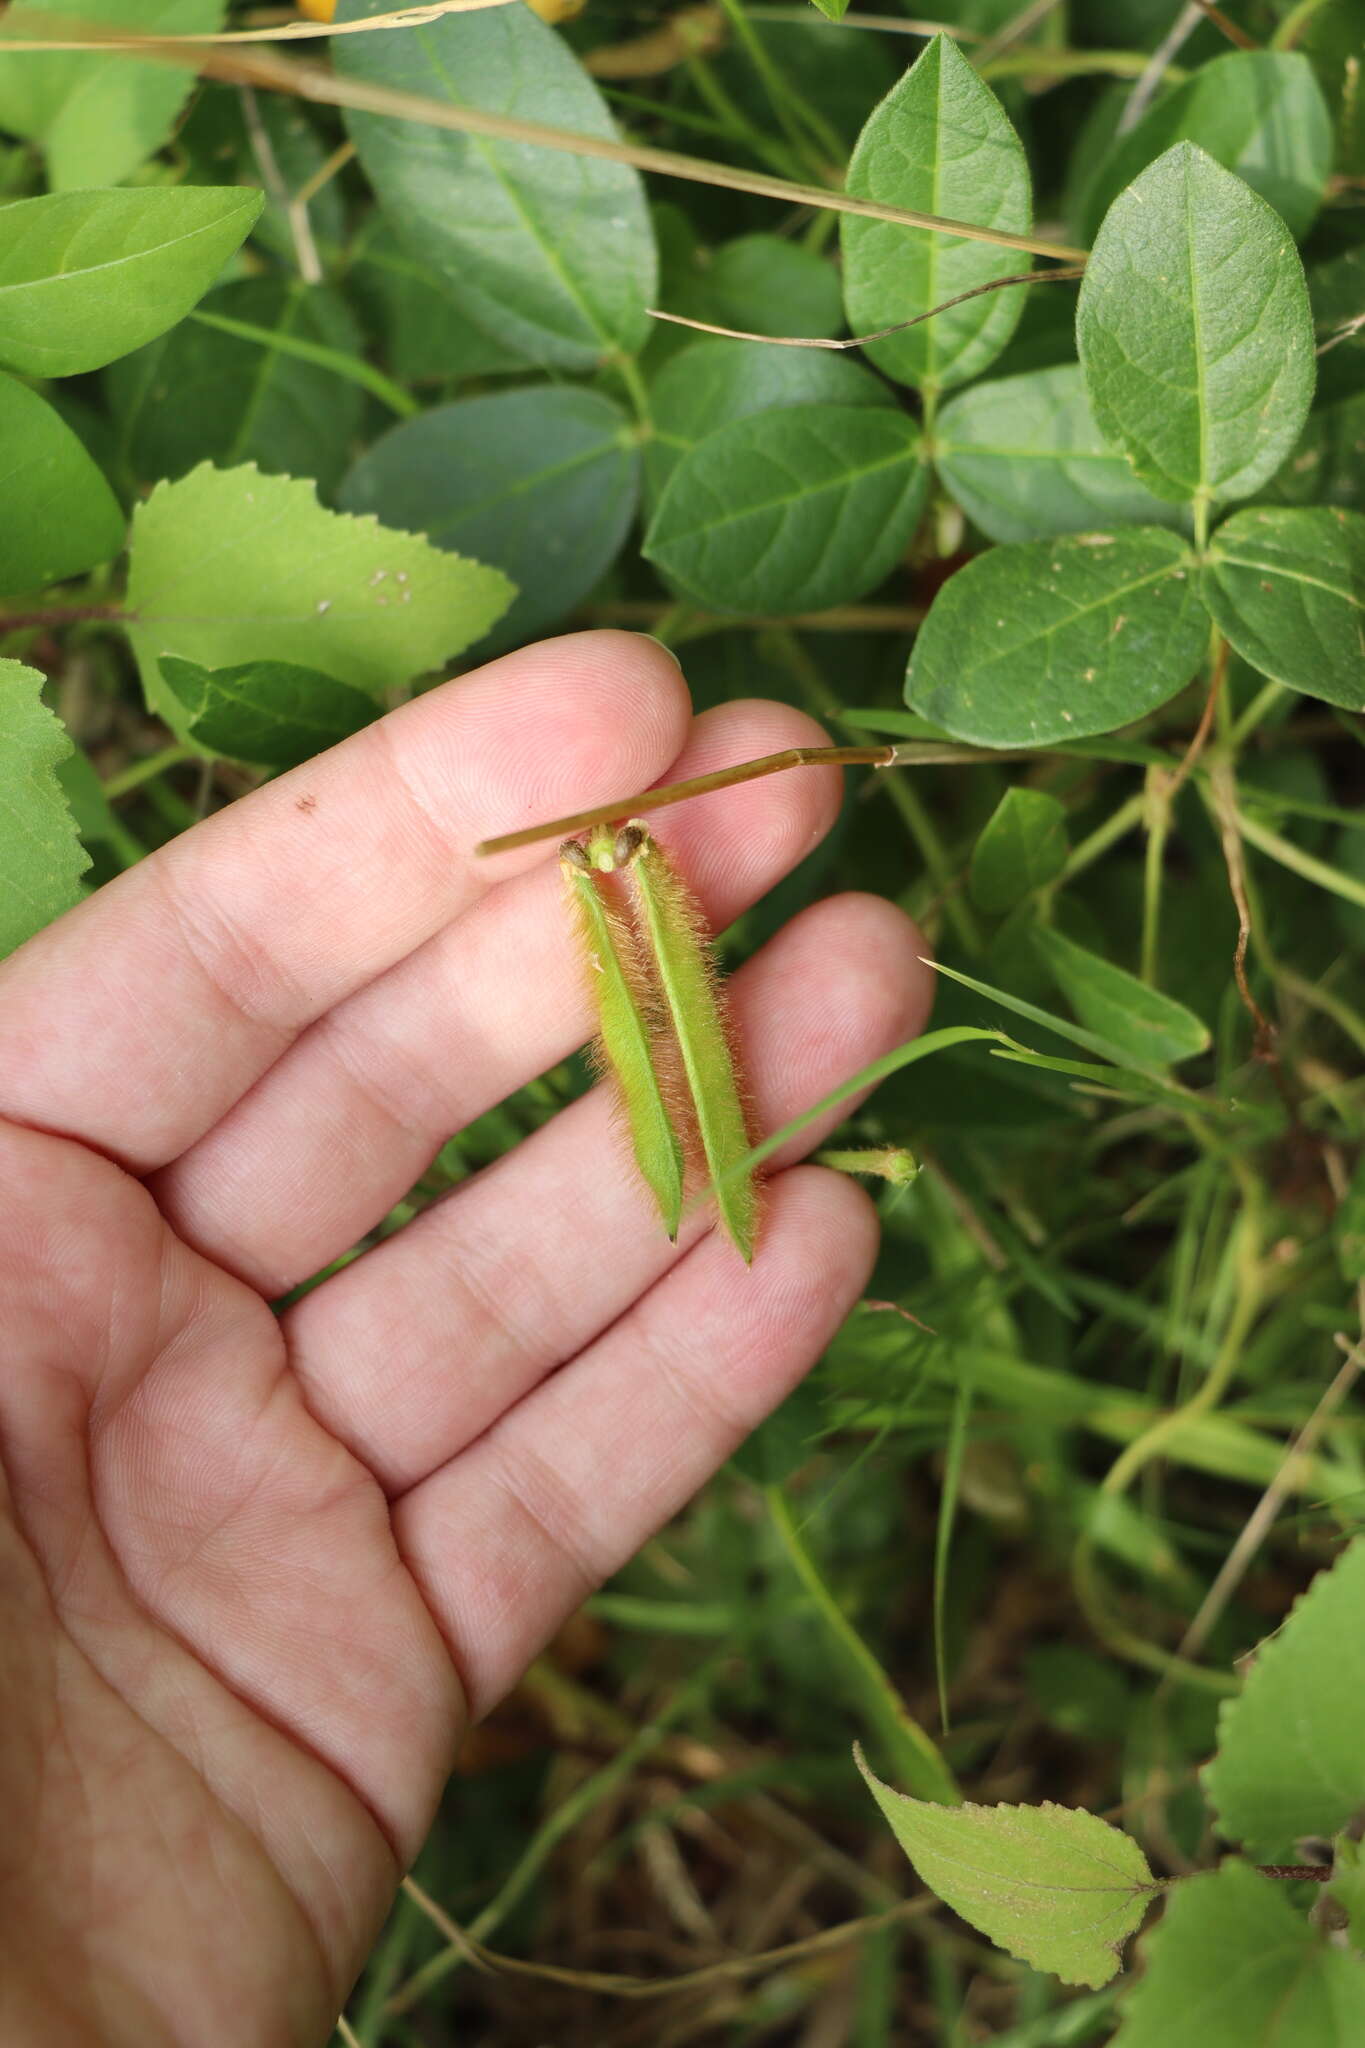 Image of Long-Leaf Cow-Pea